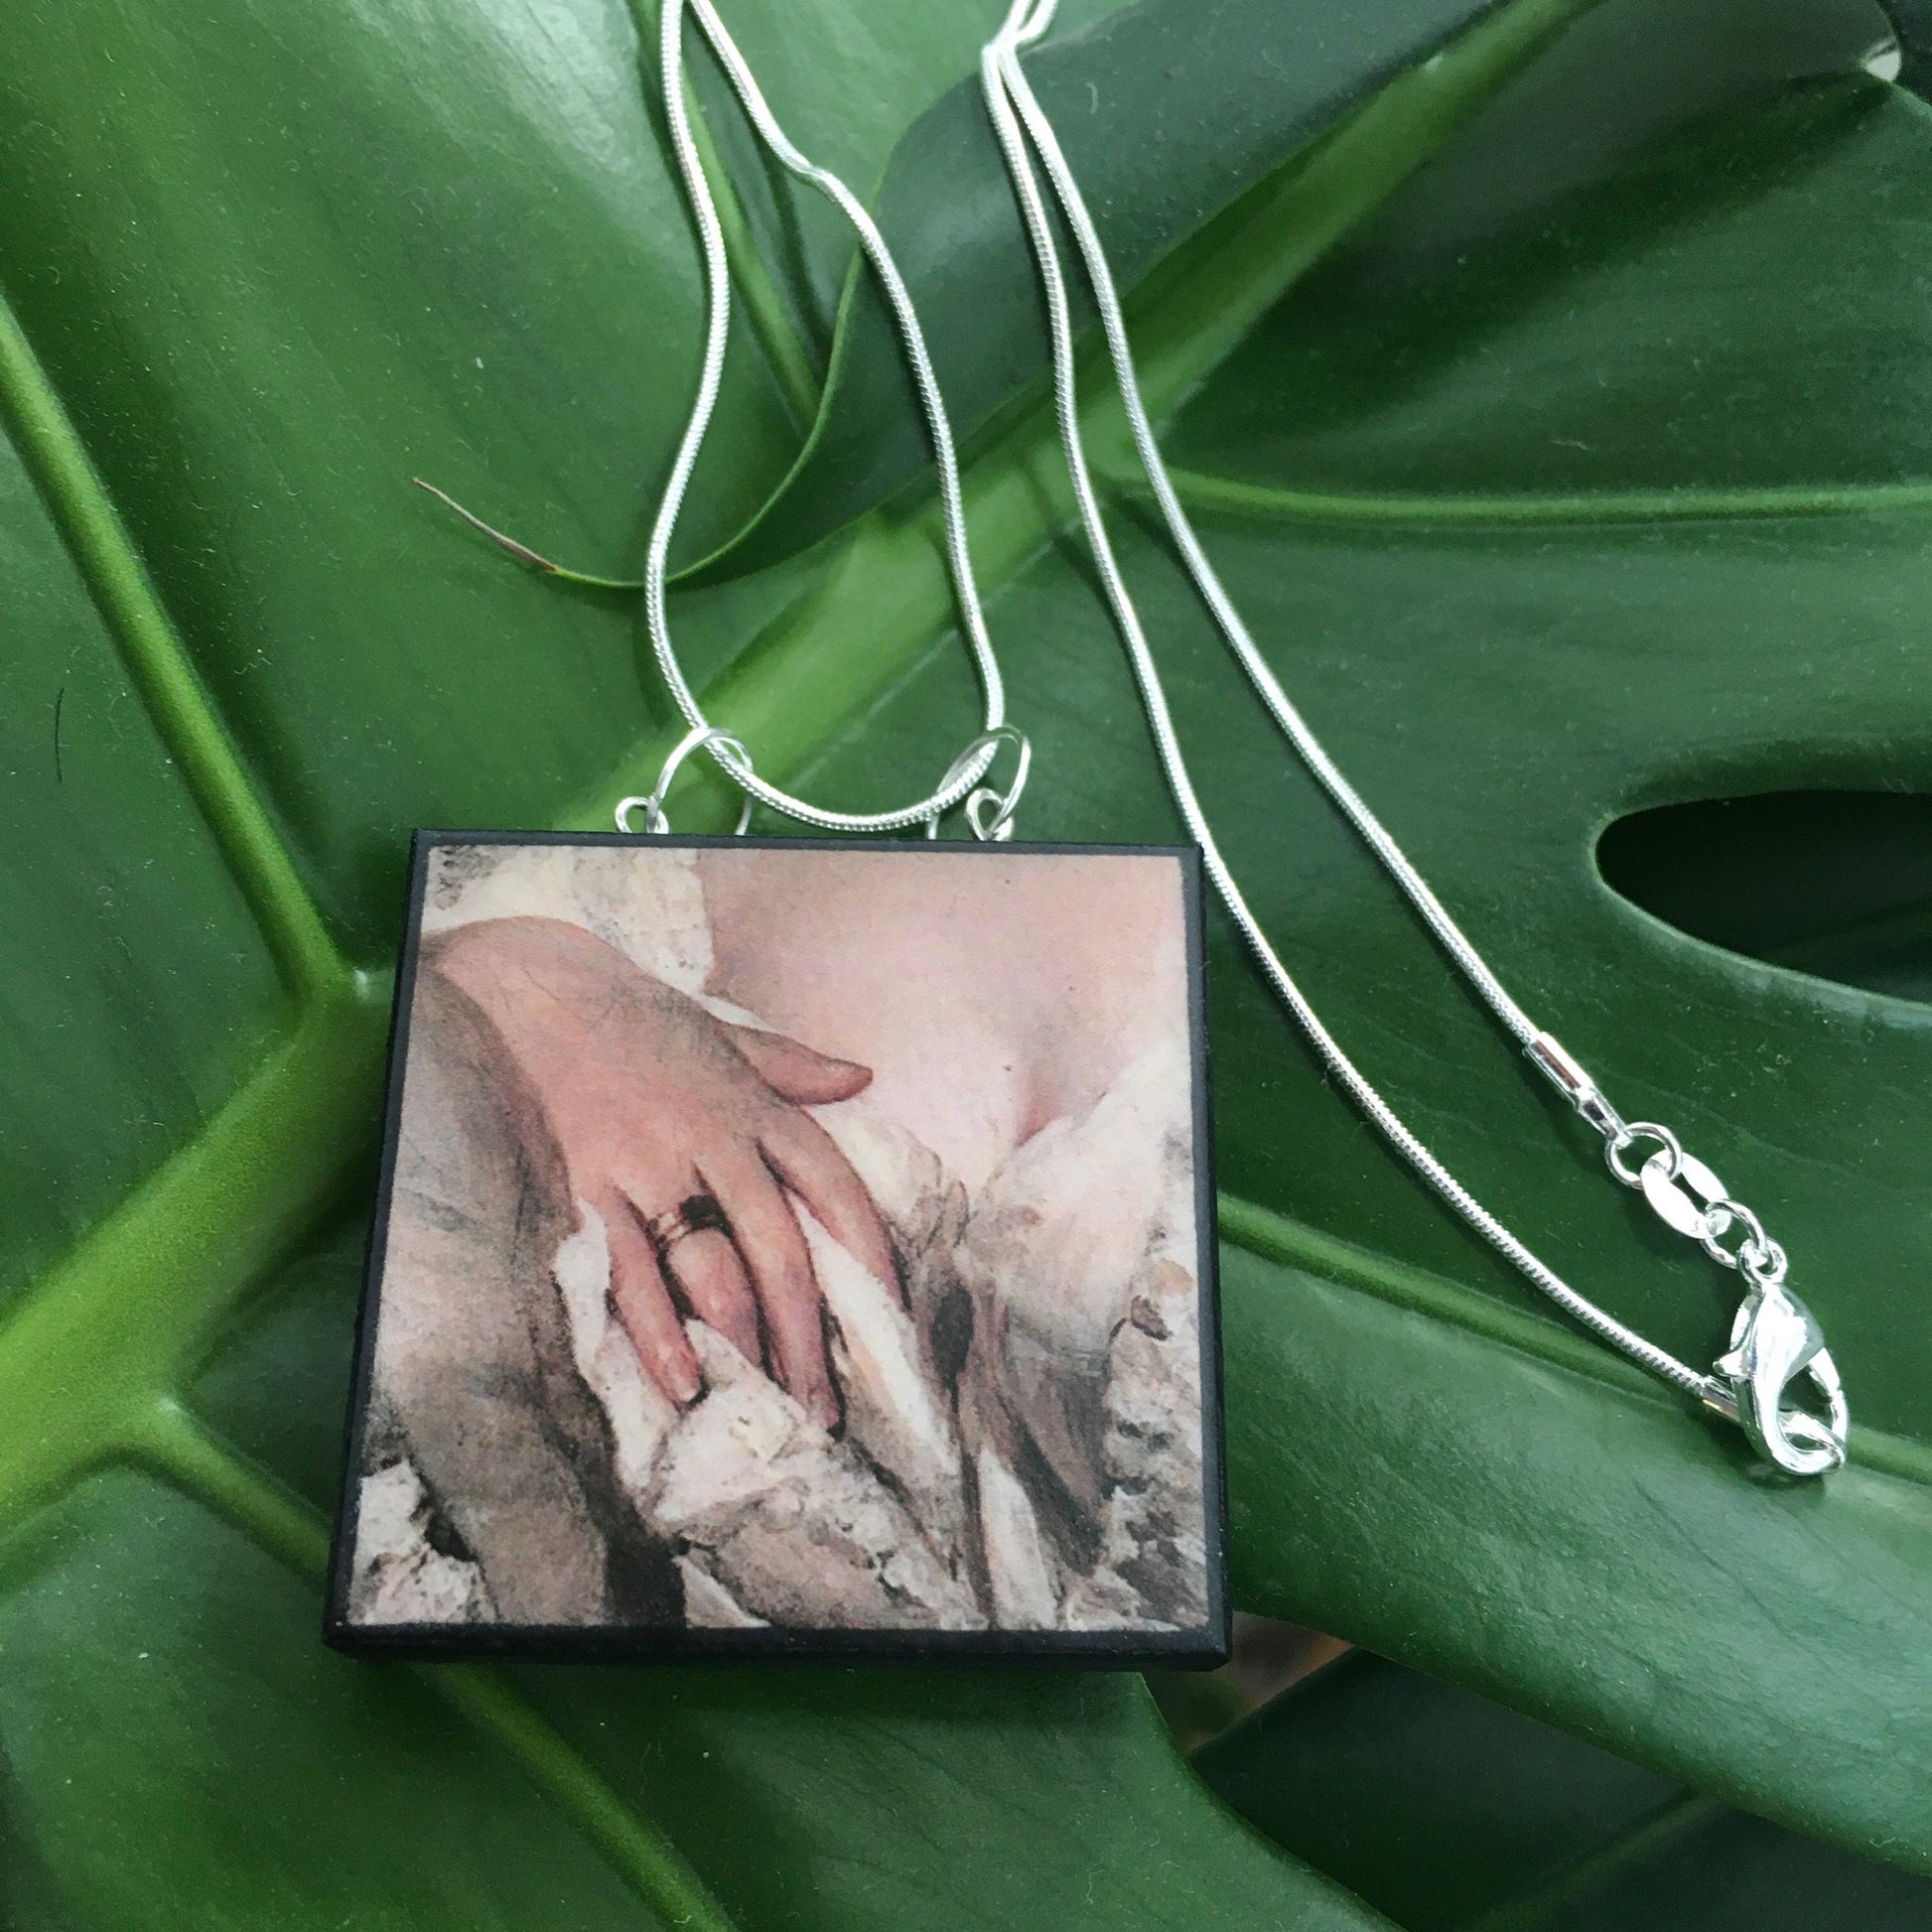 Statement necklace sterling silver chain with a wooden squared pendant inspired by a sensual art detail of a hand. quirky gift on obljewellery shop.